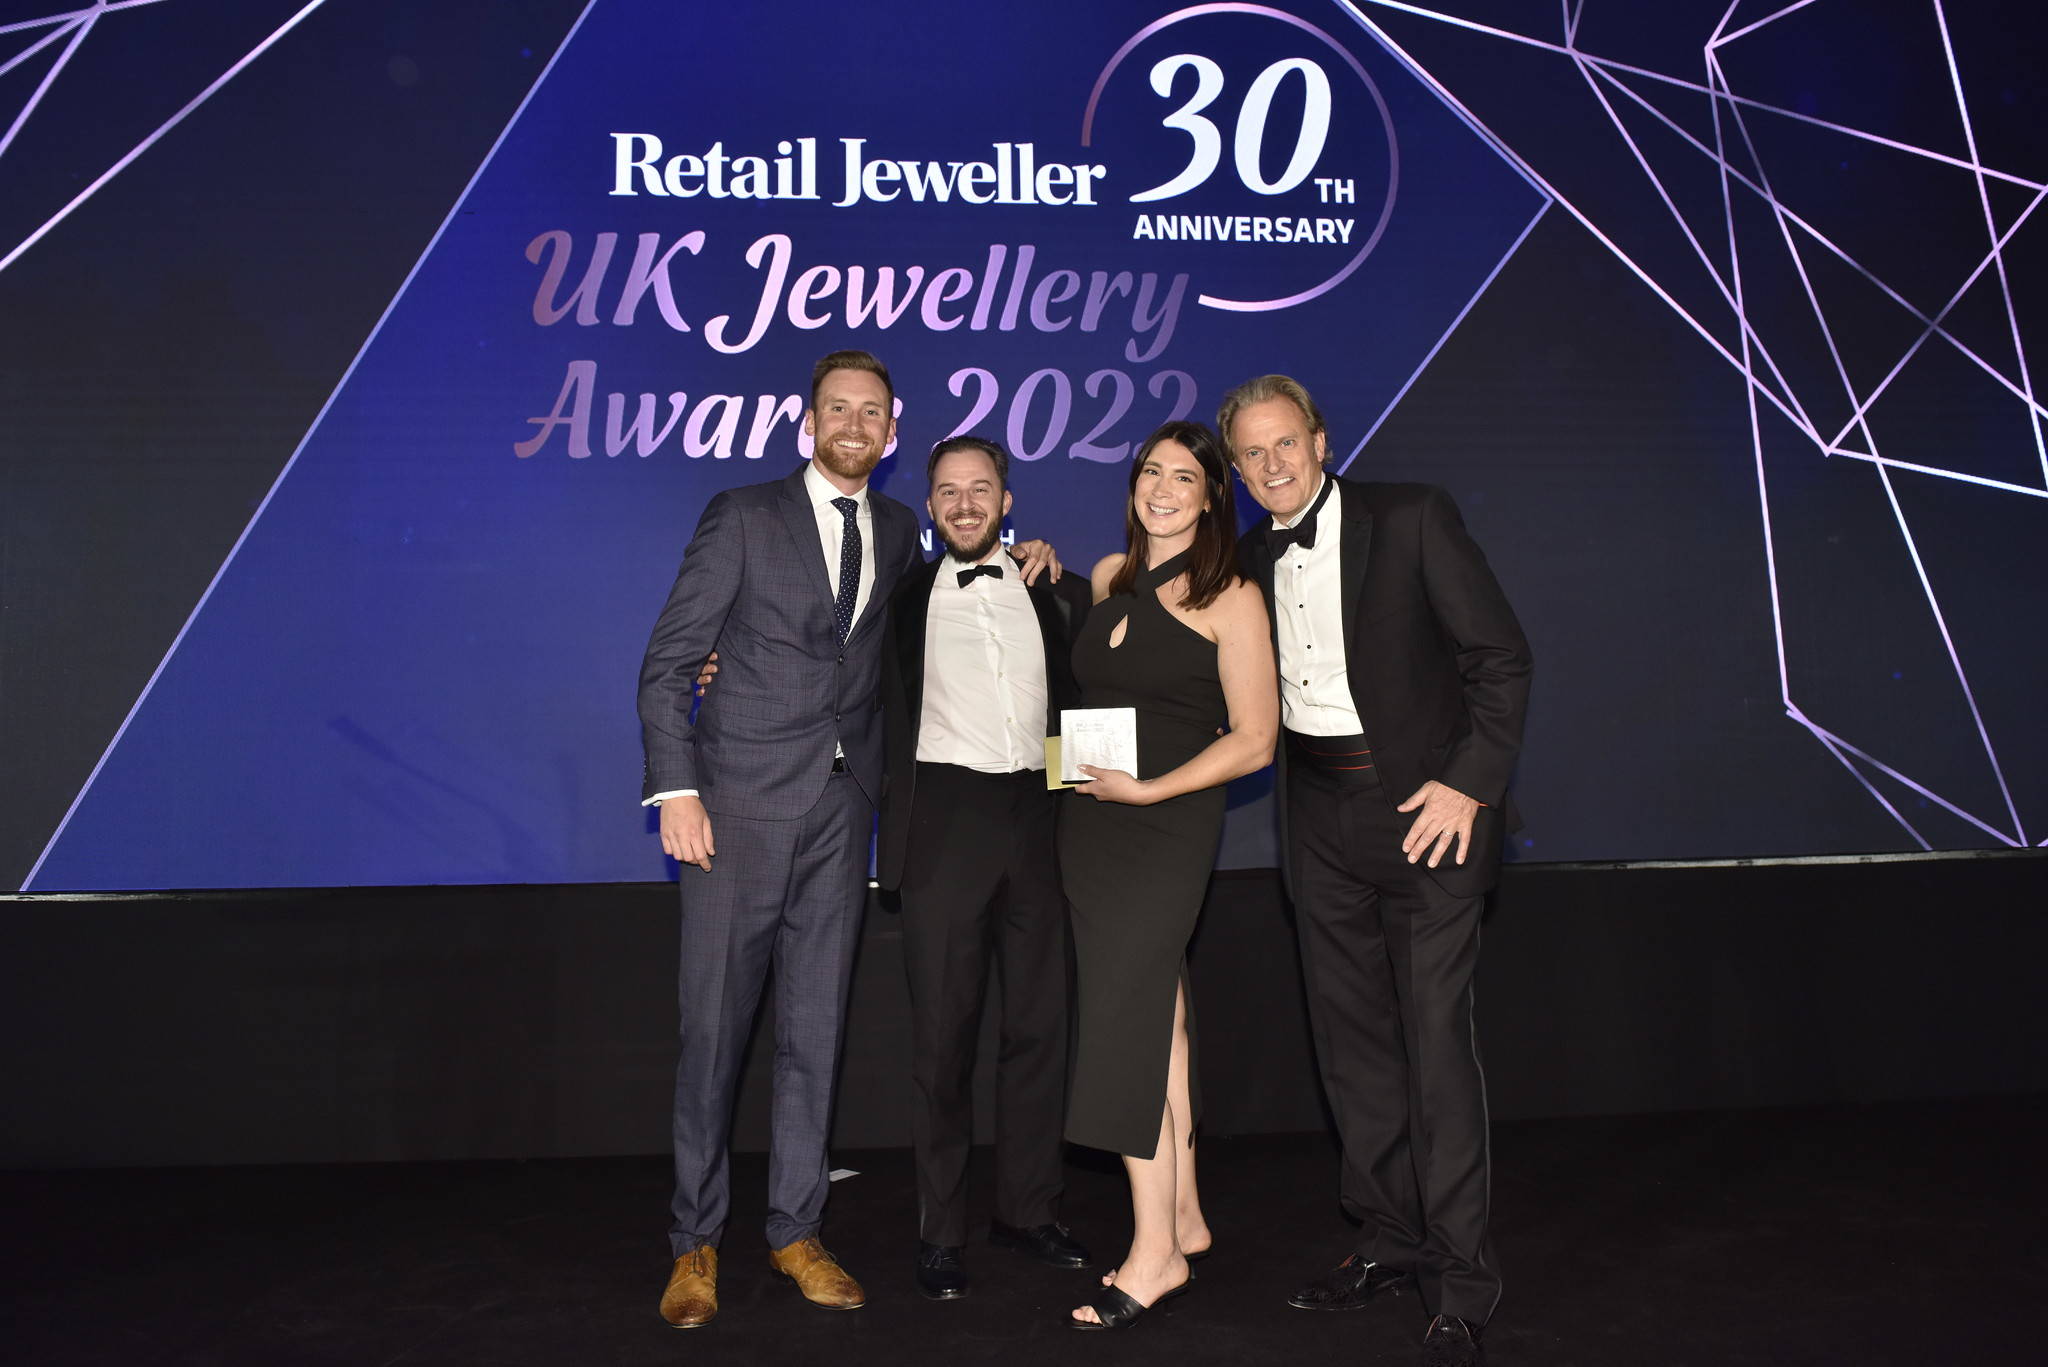 The Flinn & Steel team are presented with a trophy on stage at the UK Jewellery Awards in London's Hilton Metropole.